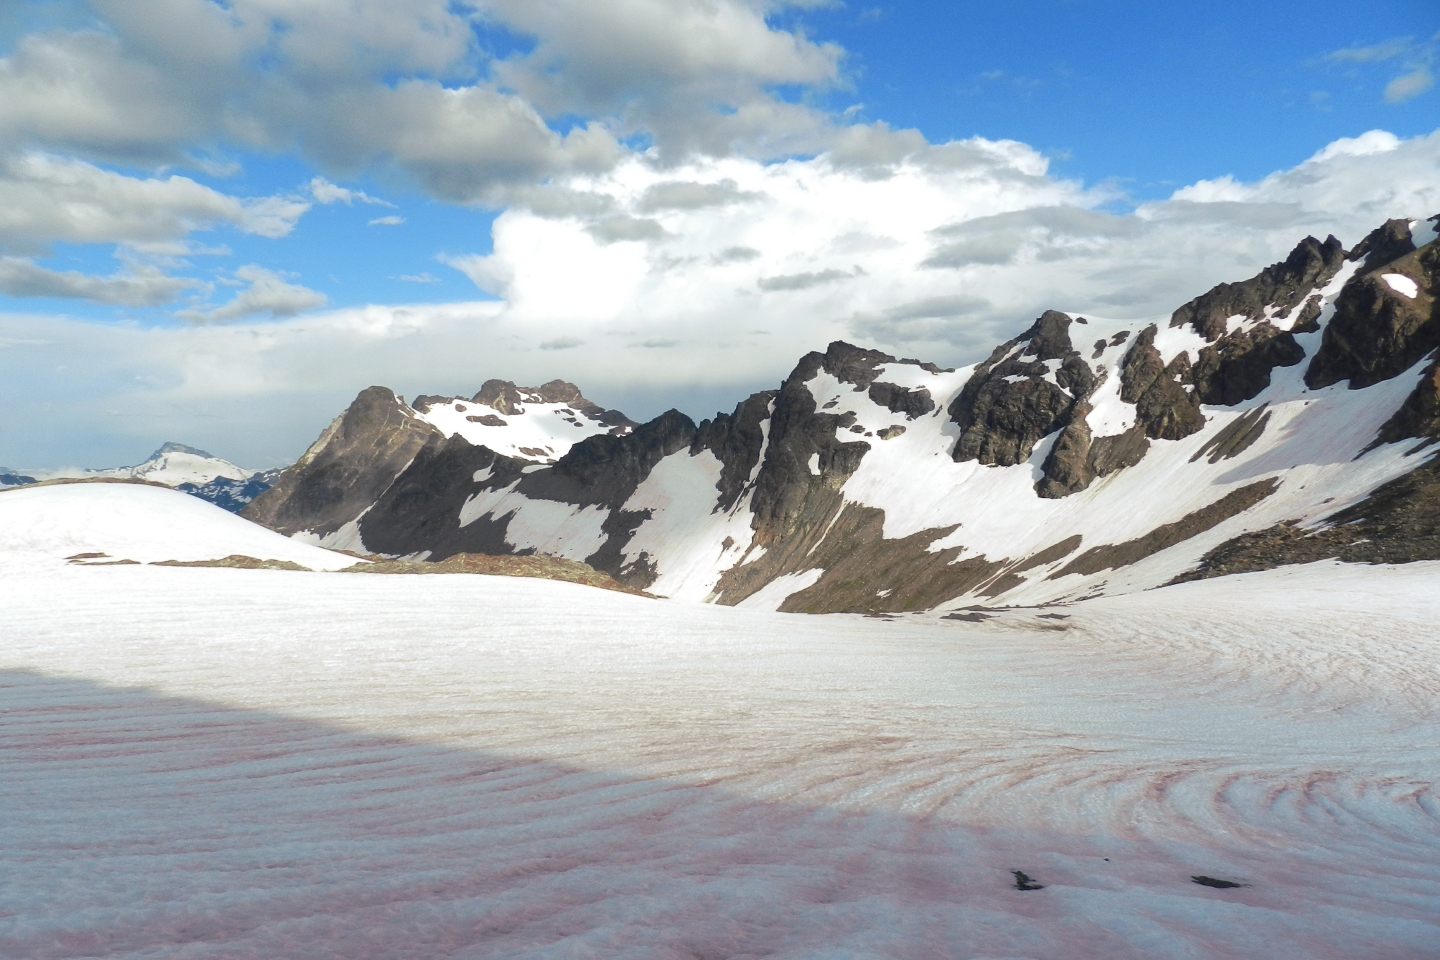 This used to be the White Chuck Glacier, now it's a seasonal snowfield